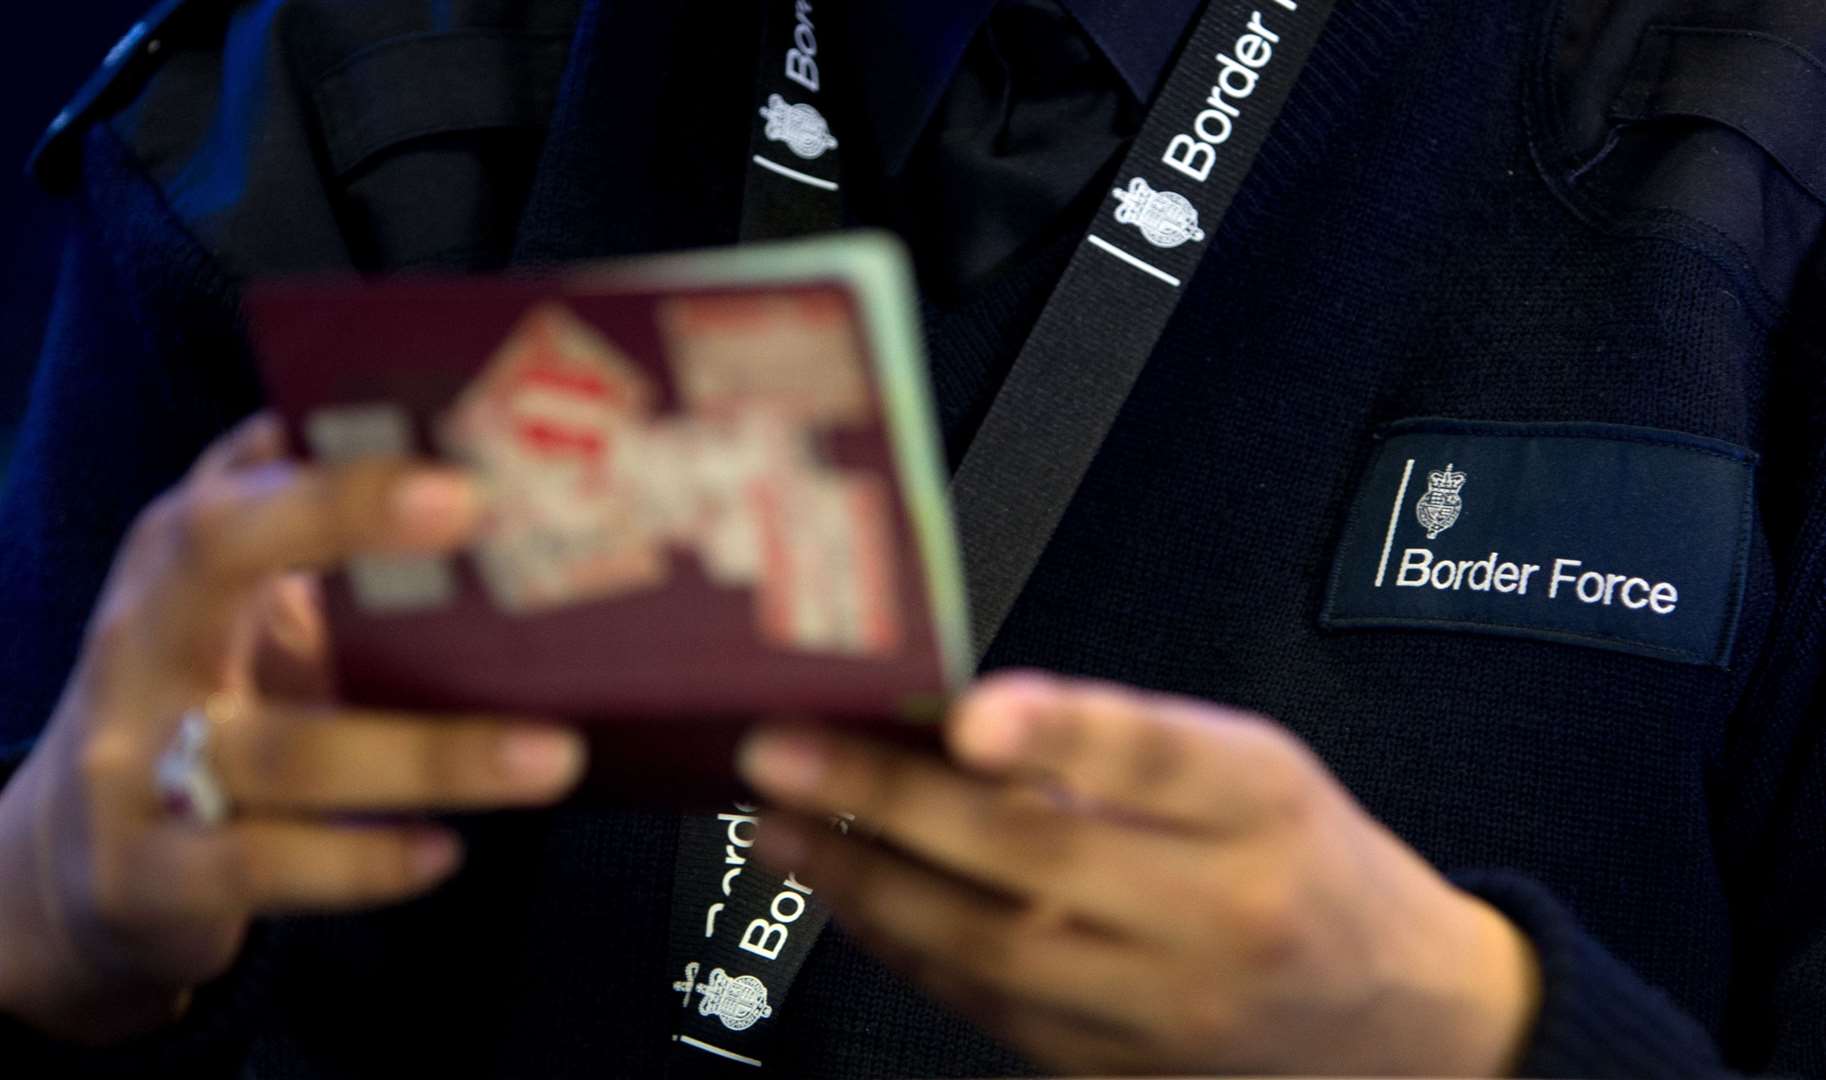 Families say they're waiting longer than 12 weeks to have visas processed by the UK government